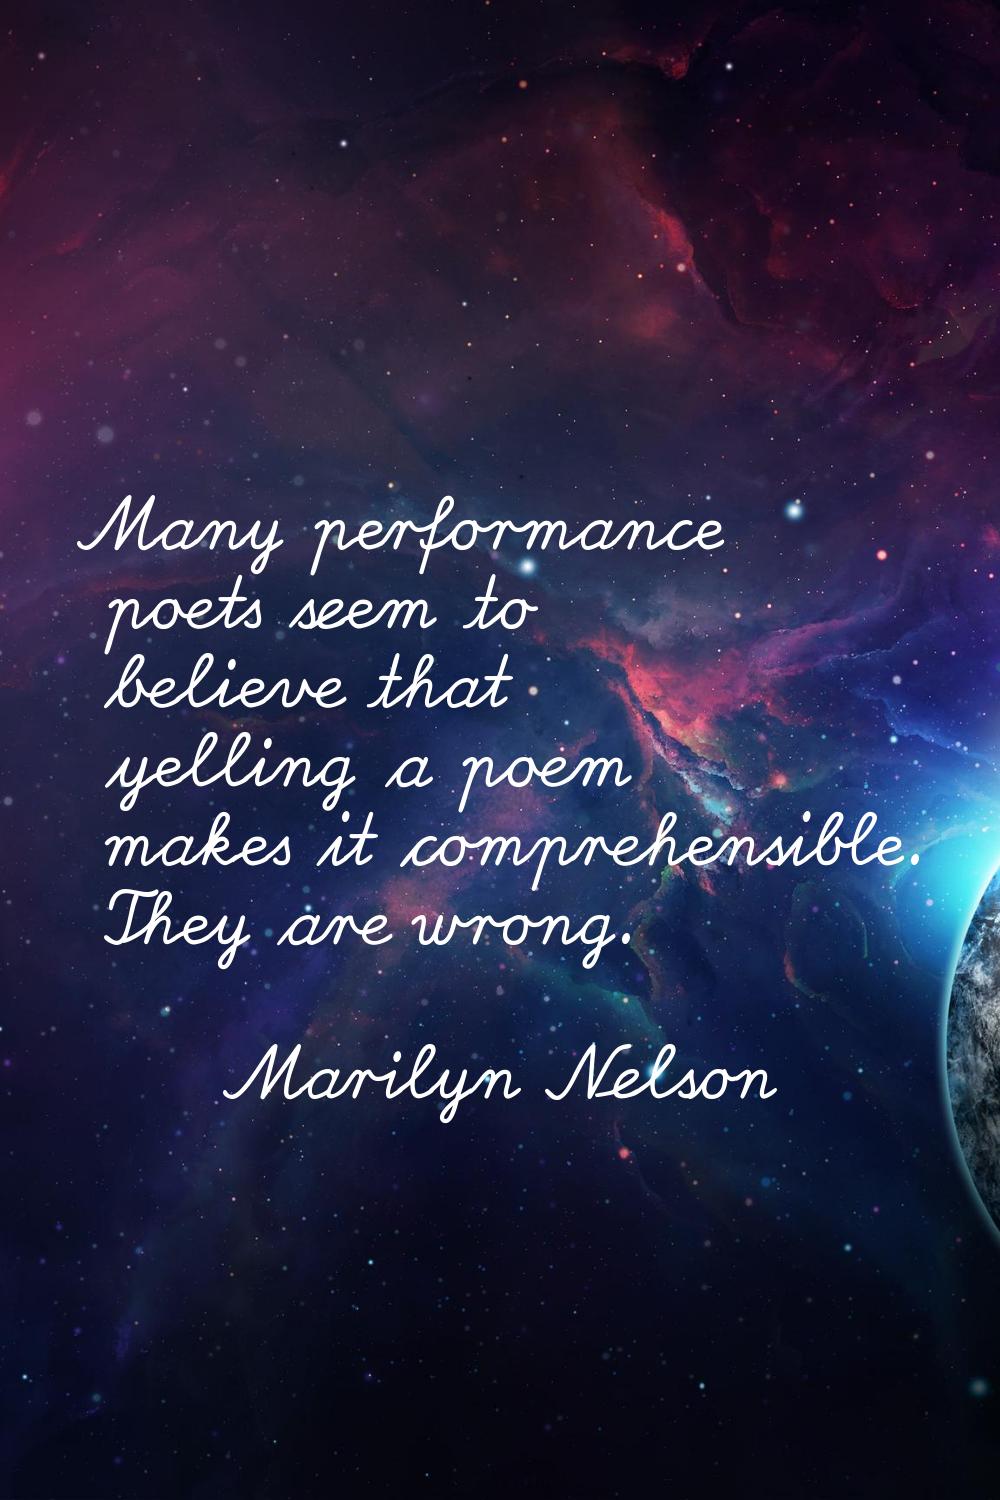 Many performance poets seem to believe that yelling a poem makes it comprehensible. They are wrong.